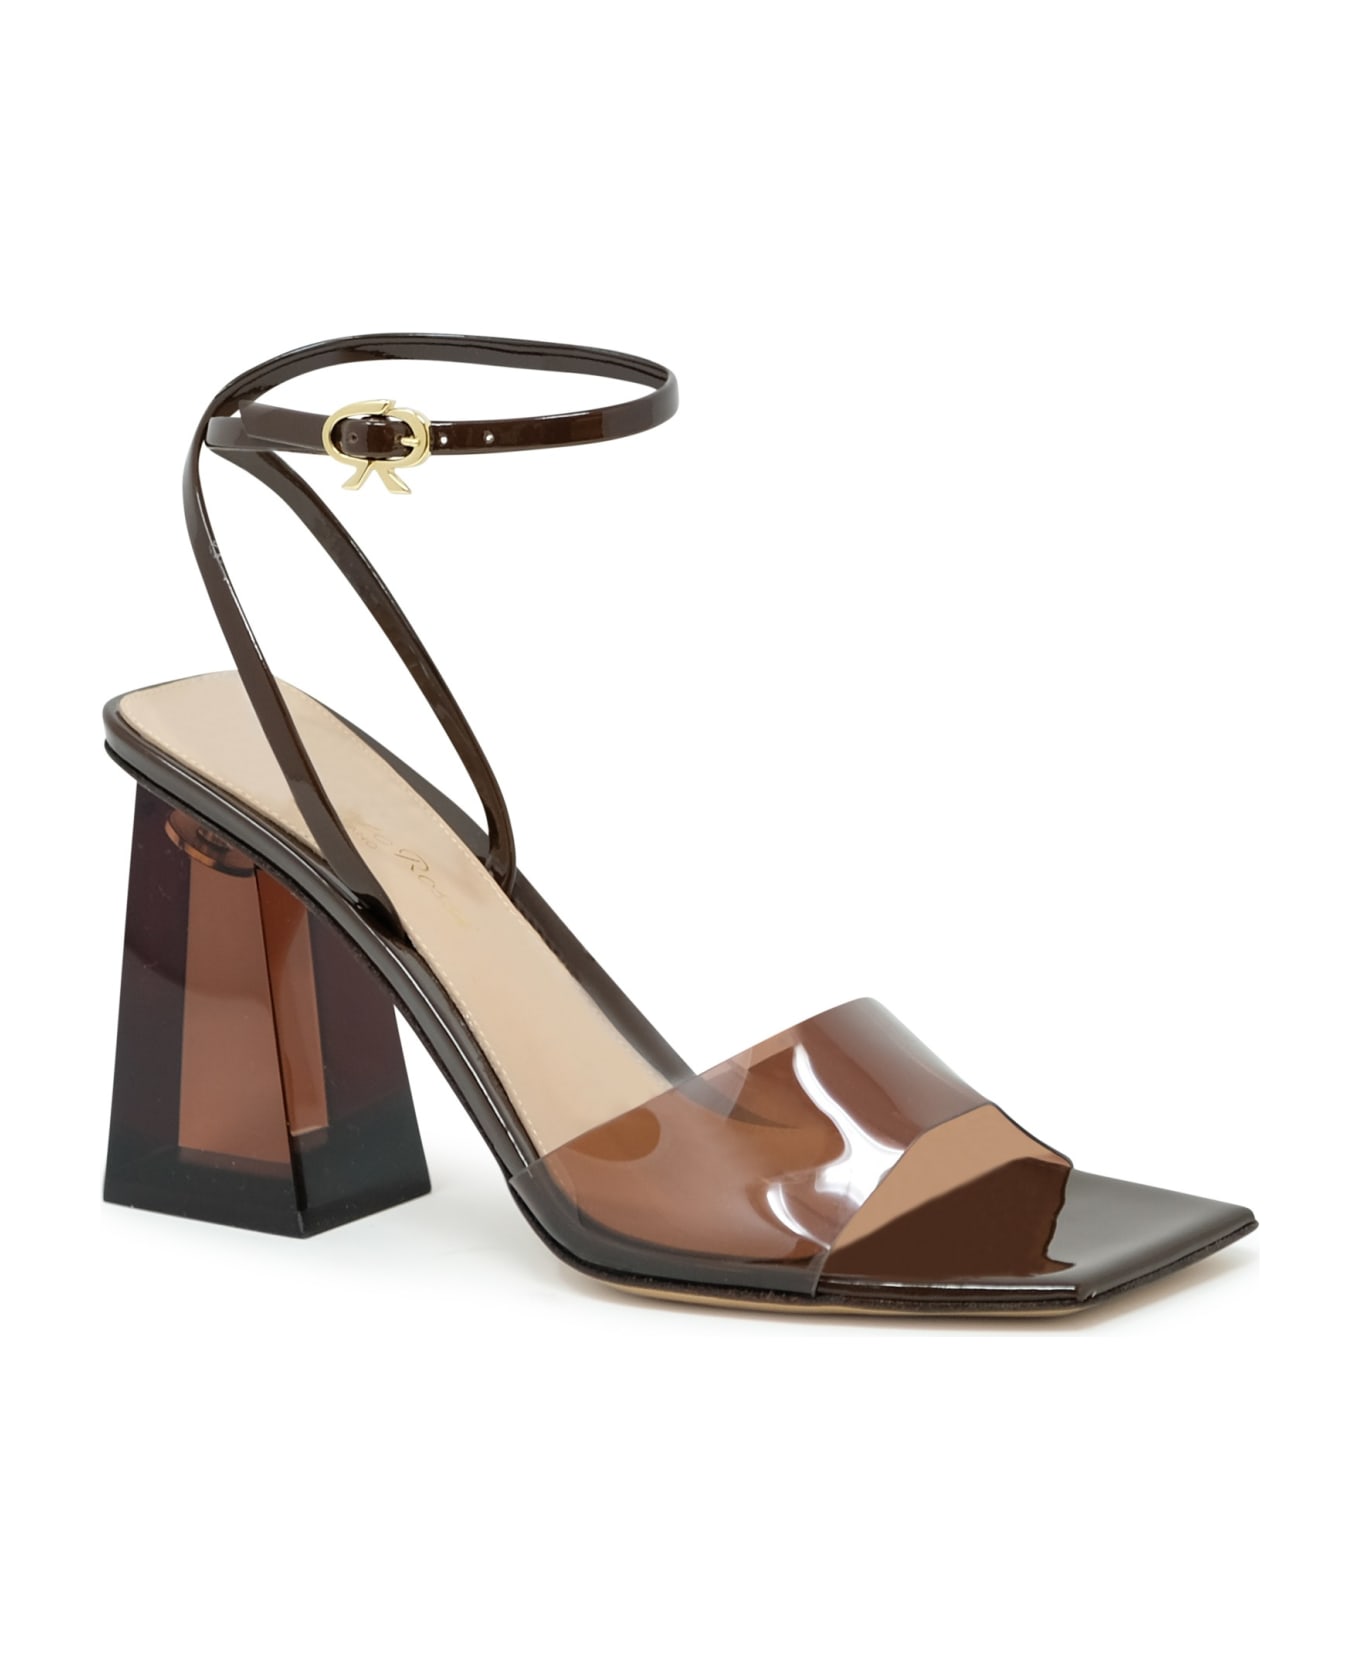 Gianvito Rossi Brown Glass Patent Leather Sandals - BROWN